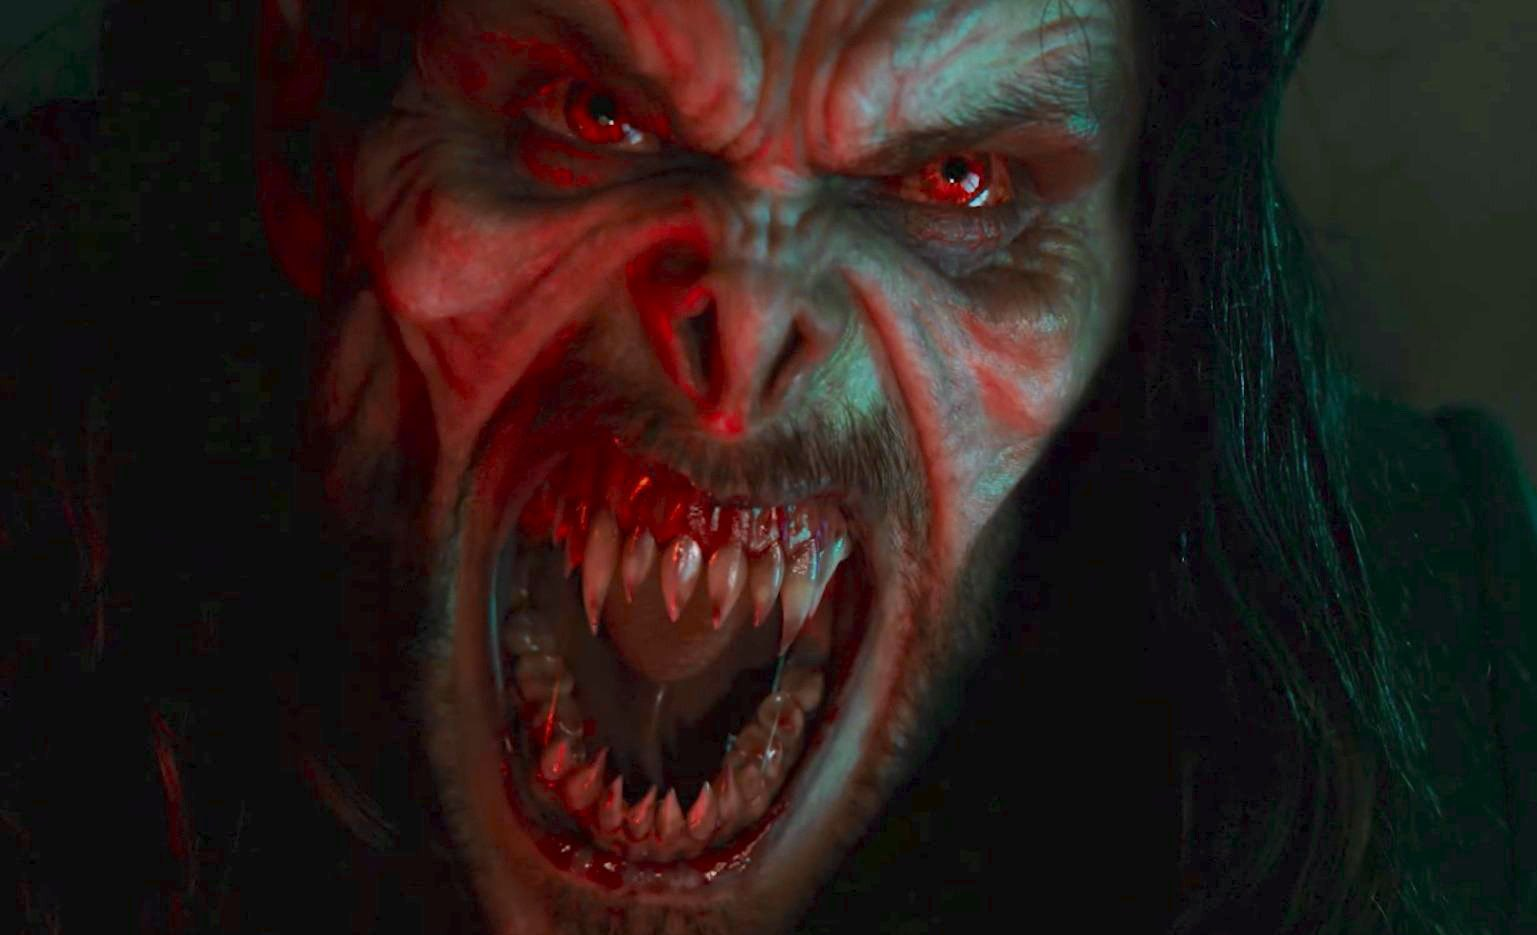 Morbius': No Joke, Sony Shifts 'Spider Man' Spinoff To An April 2022 Release Date